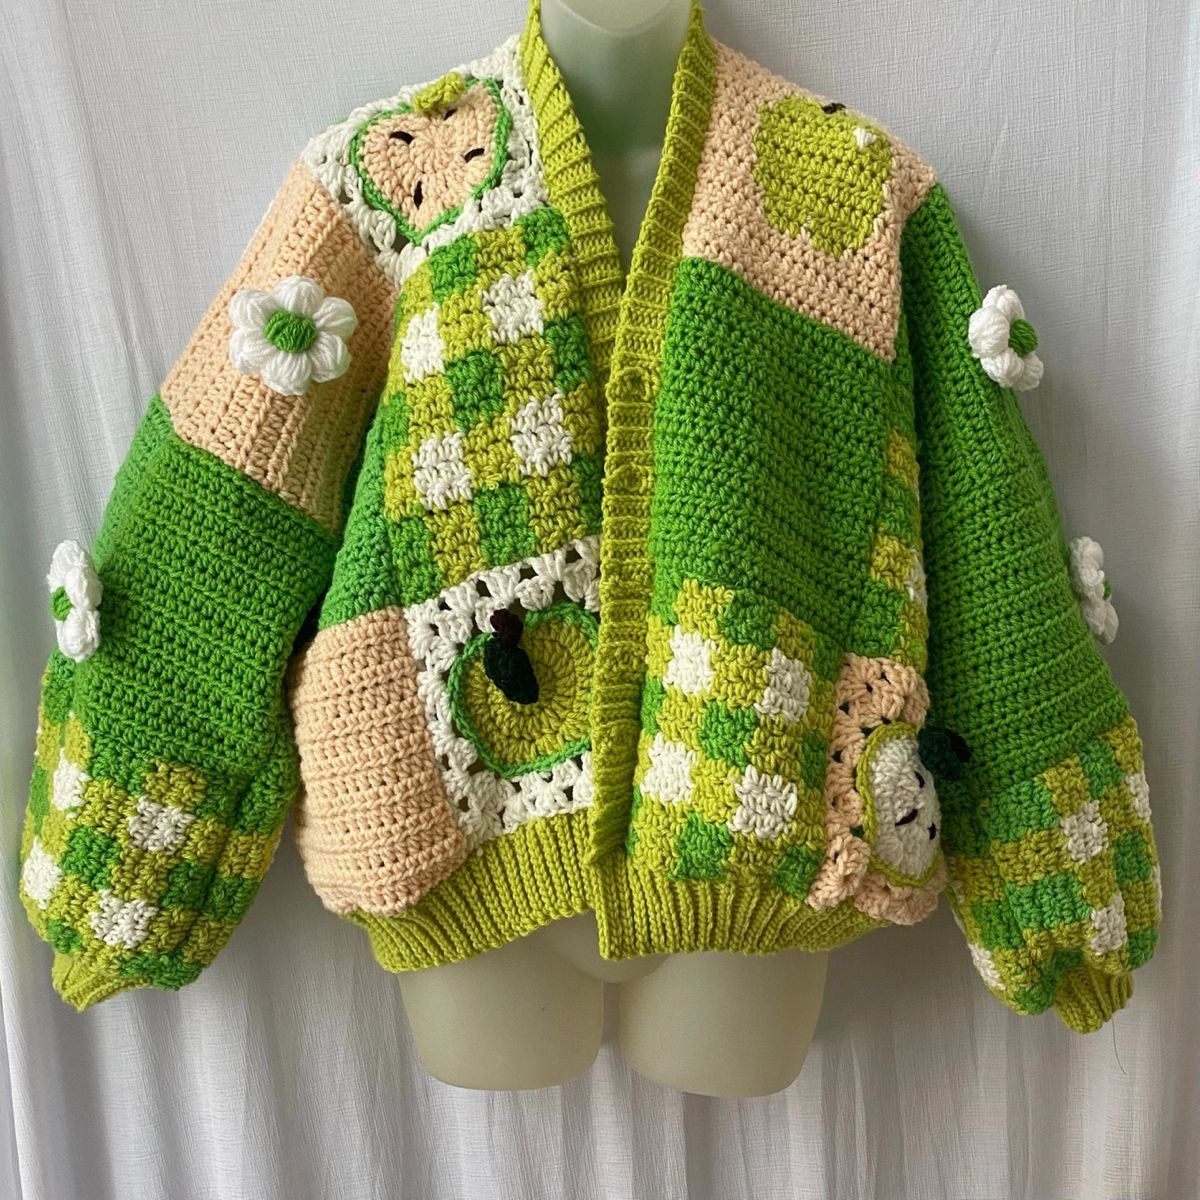 How to choose a perfect green cardigan?